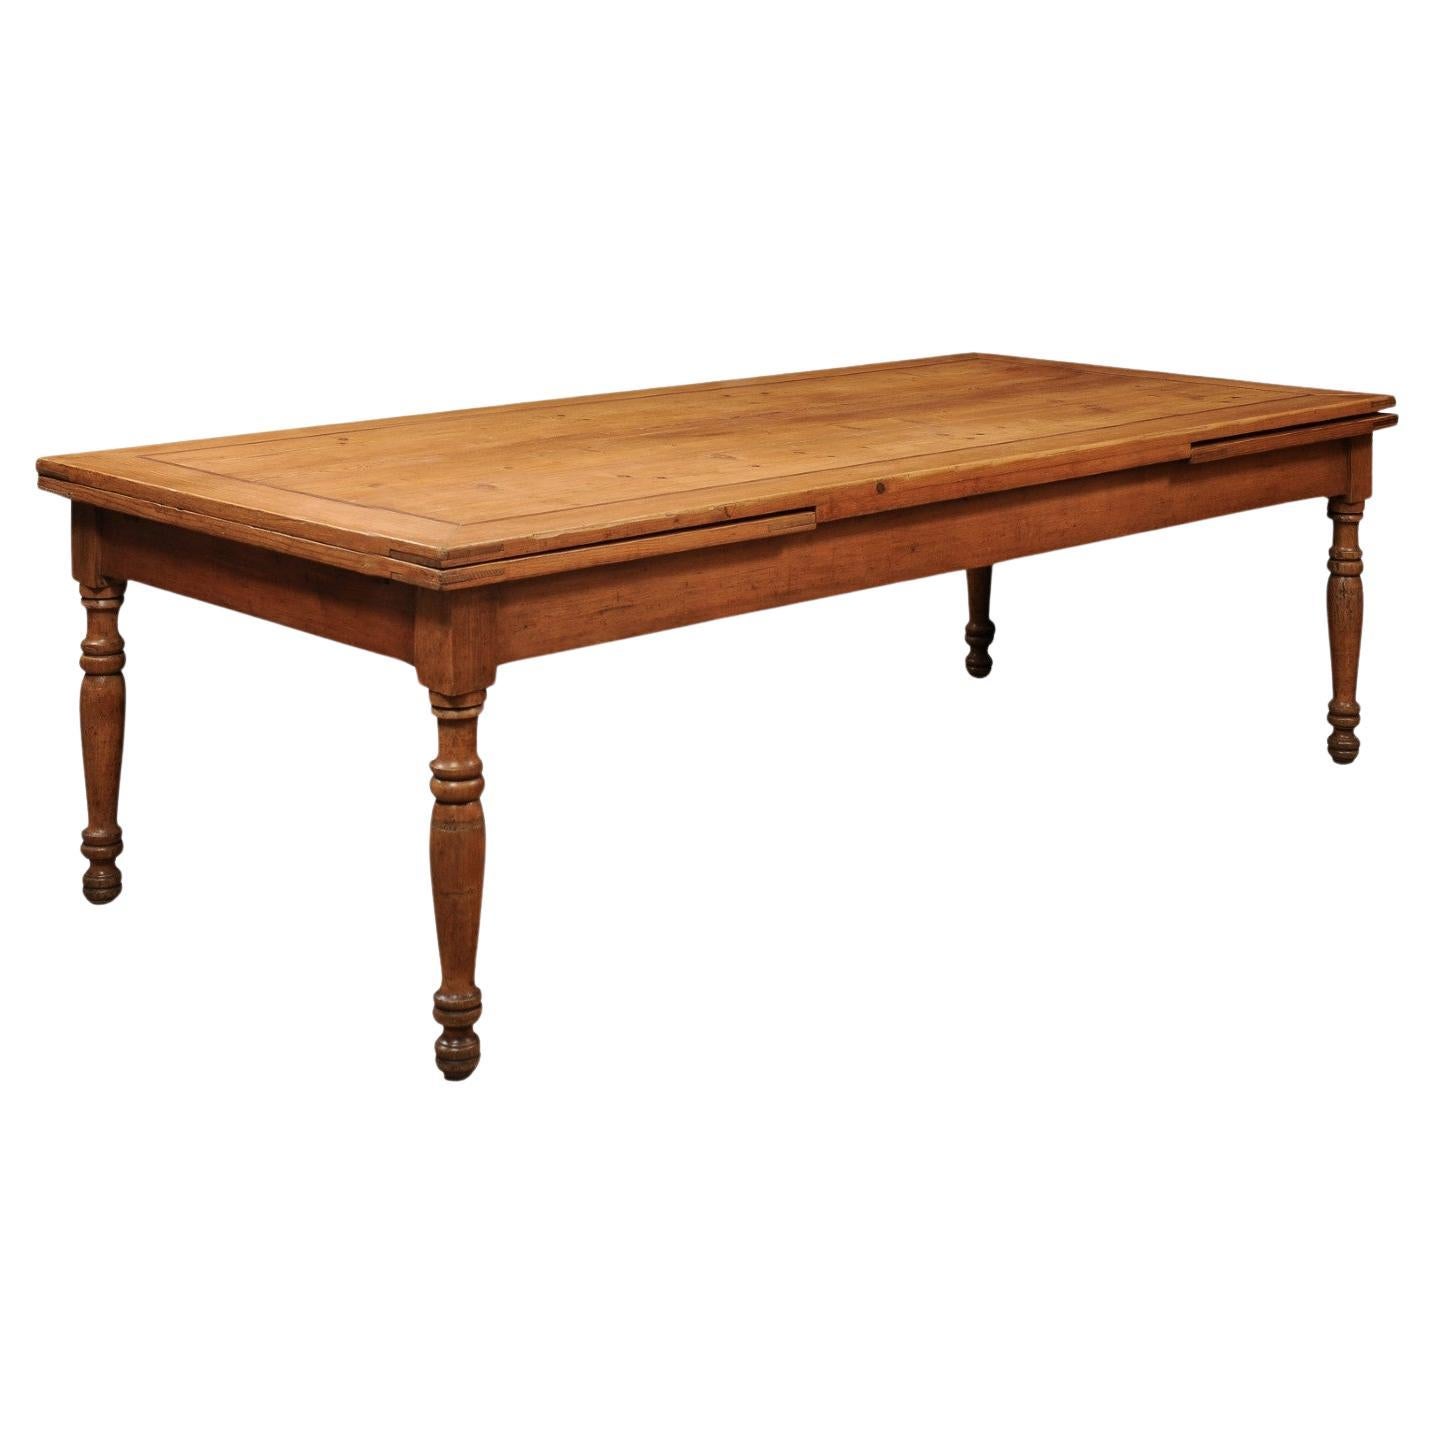 Large Mid 19th Century Italian Pine & Walnut Extending Dining Table For Sale